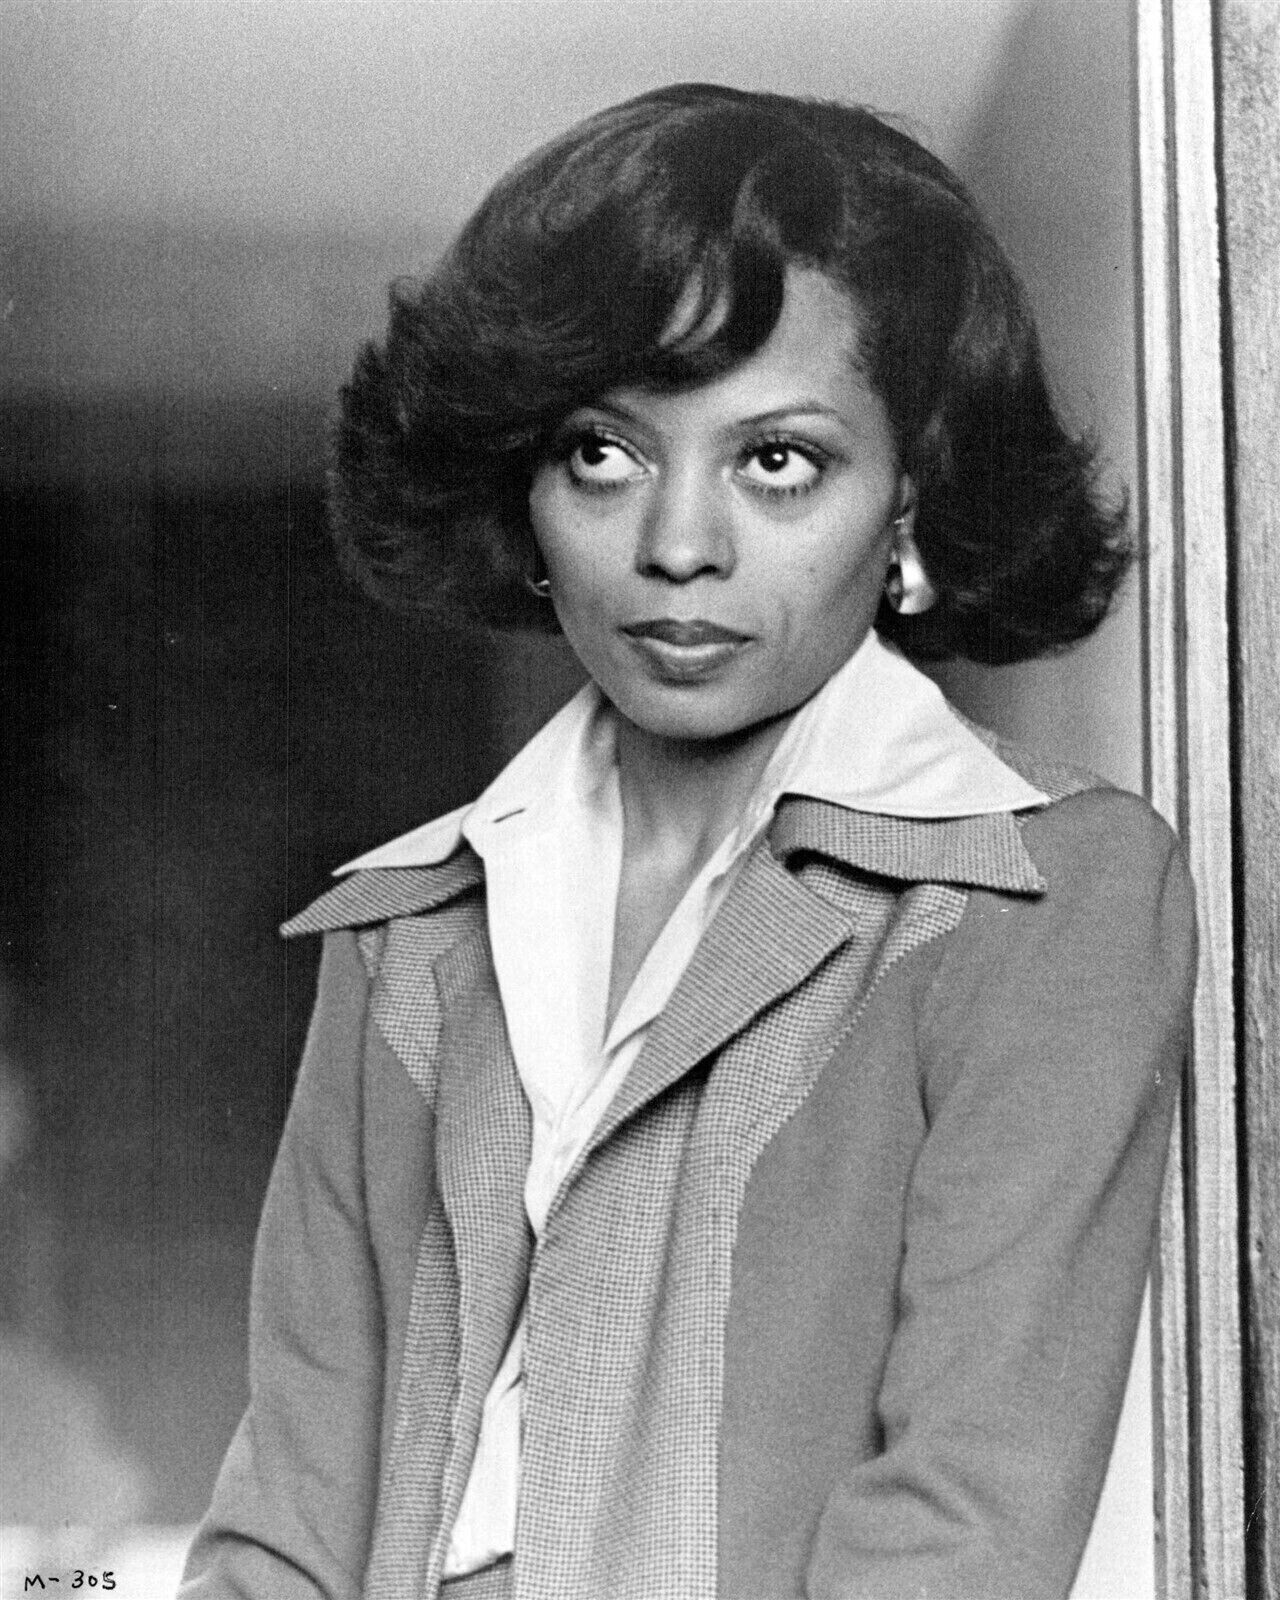 Diana Ross 1975 standing in doorway portrait from Mahogany 4x6 inch photo